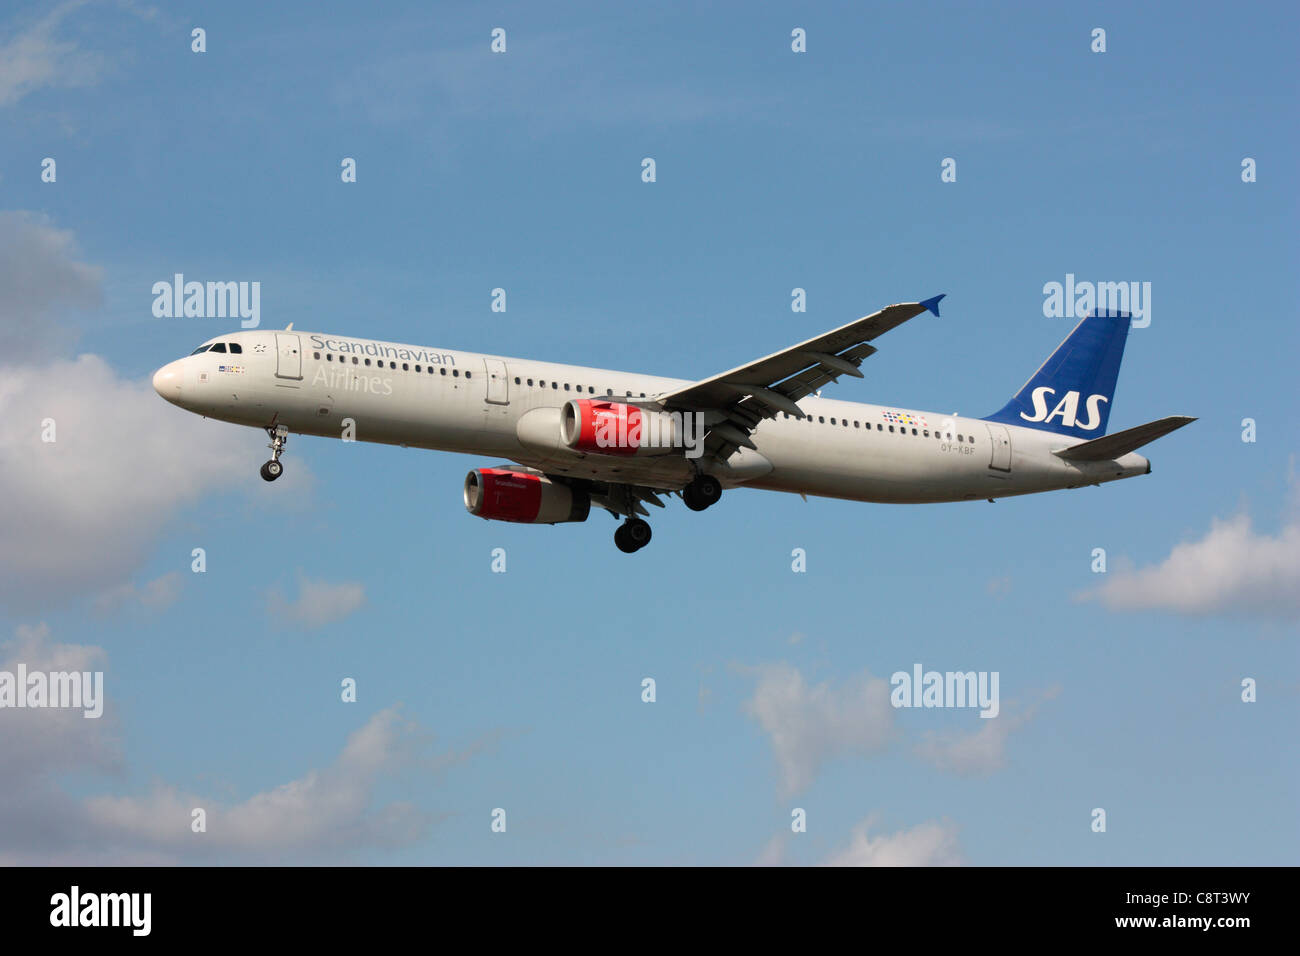 SAS Scandinavian Airlines Airbus A321 passenger jet plane flying on approach Stock Photo